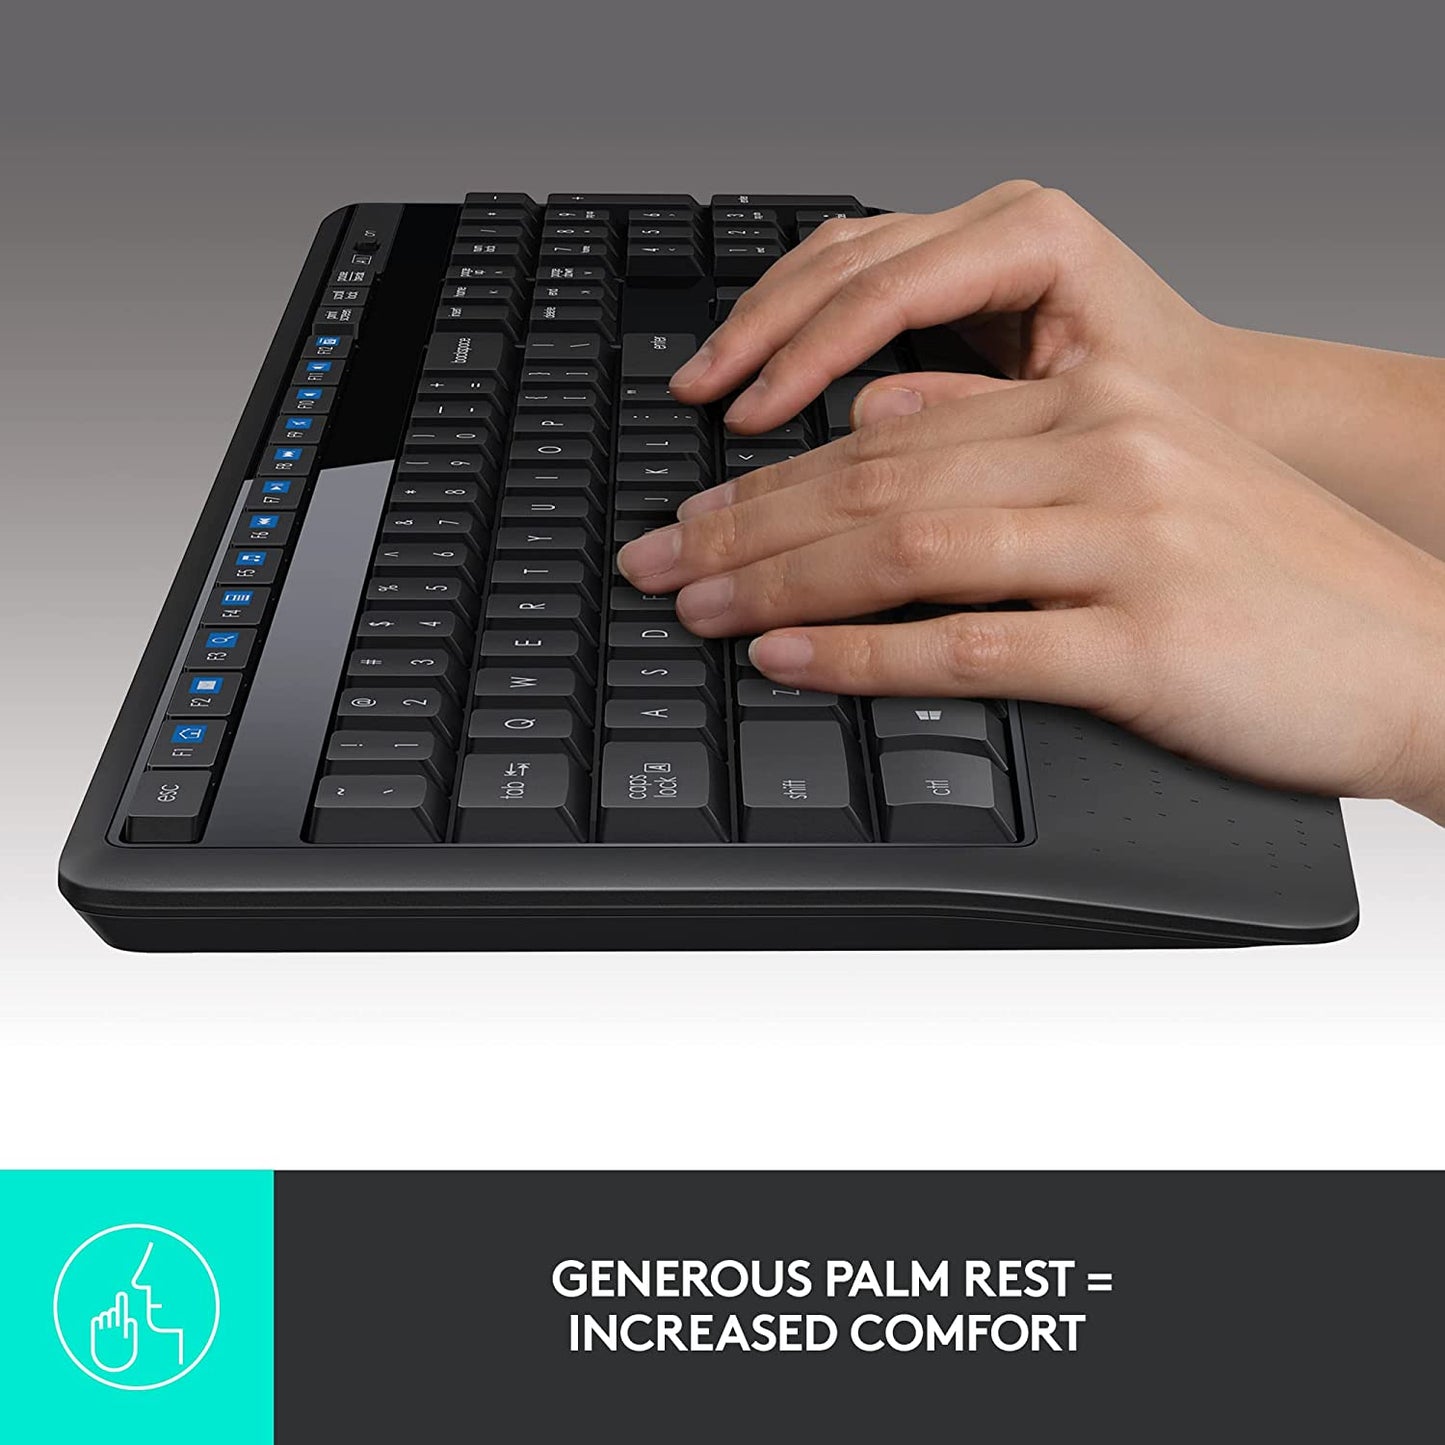 Logitech MK345 Wireless Combo Full-Sized Keyboard with Palm Rest and Comfortable Right-Handed Mouse, 2.4 GHz Wireless USB Receiver, Compatible with PC, Laptop